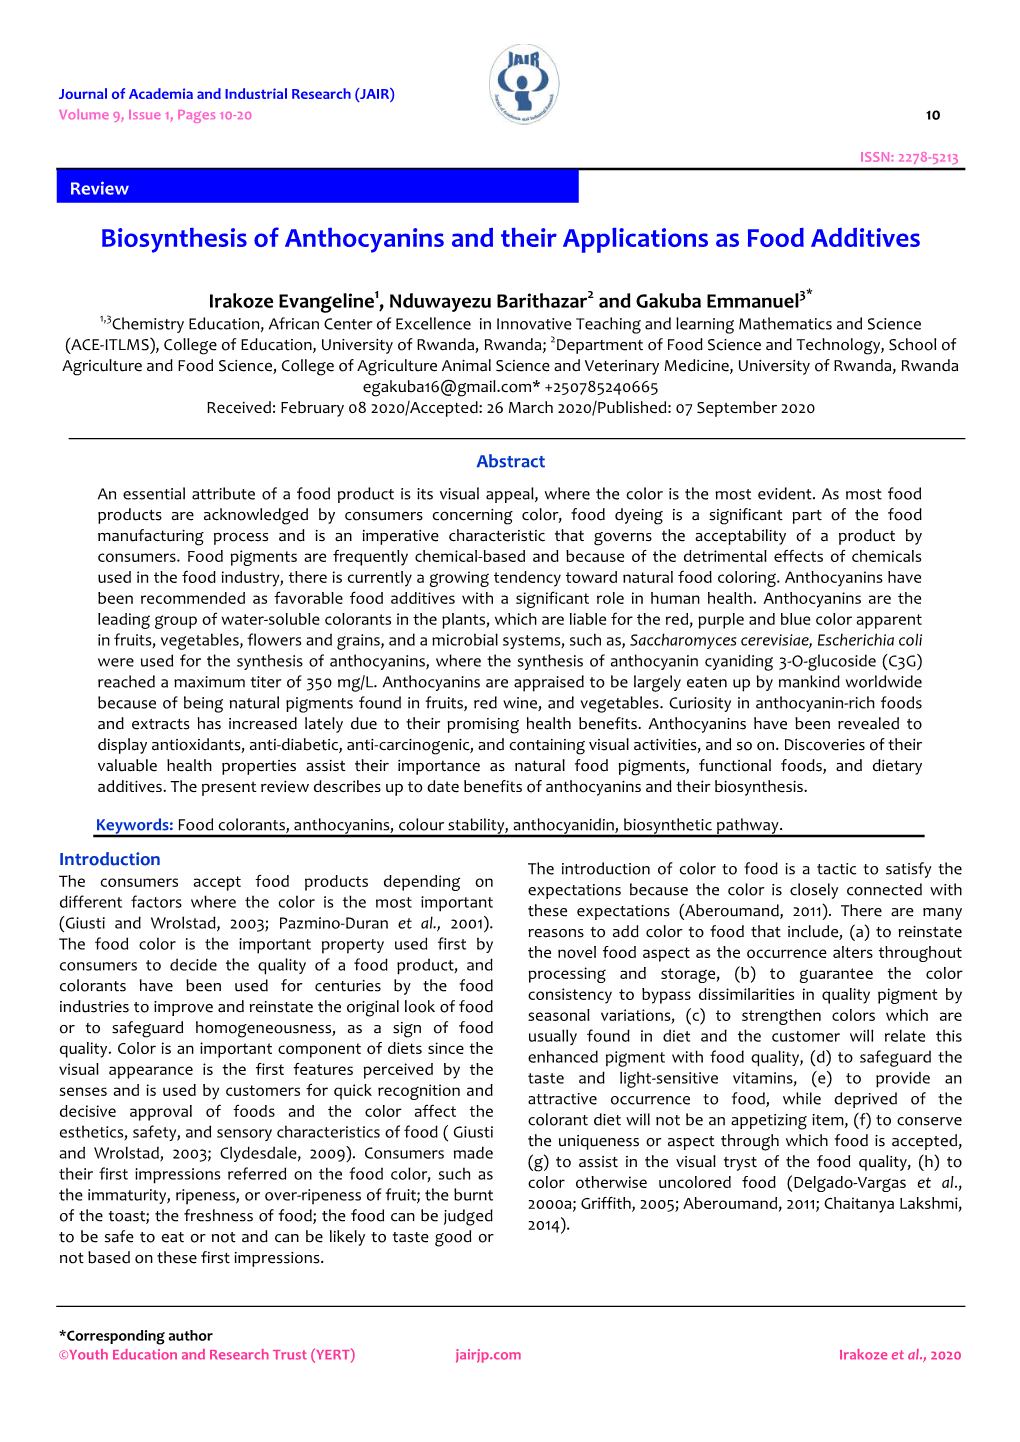 Biosynthesis of Anthocyanins and Their Applications As Food Additives